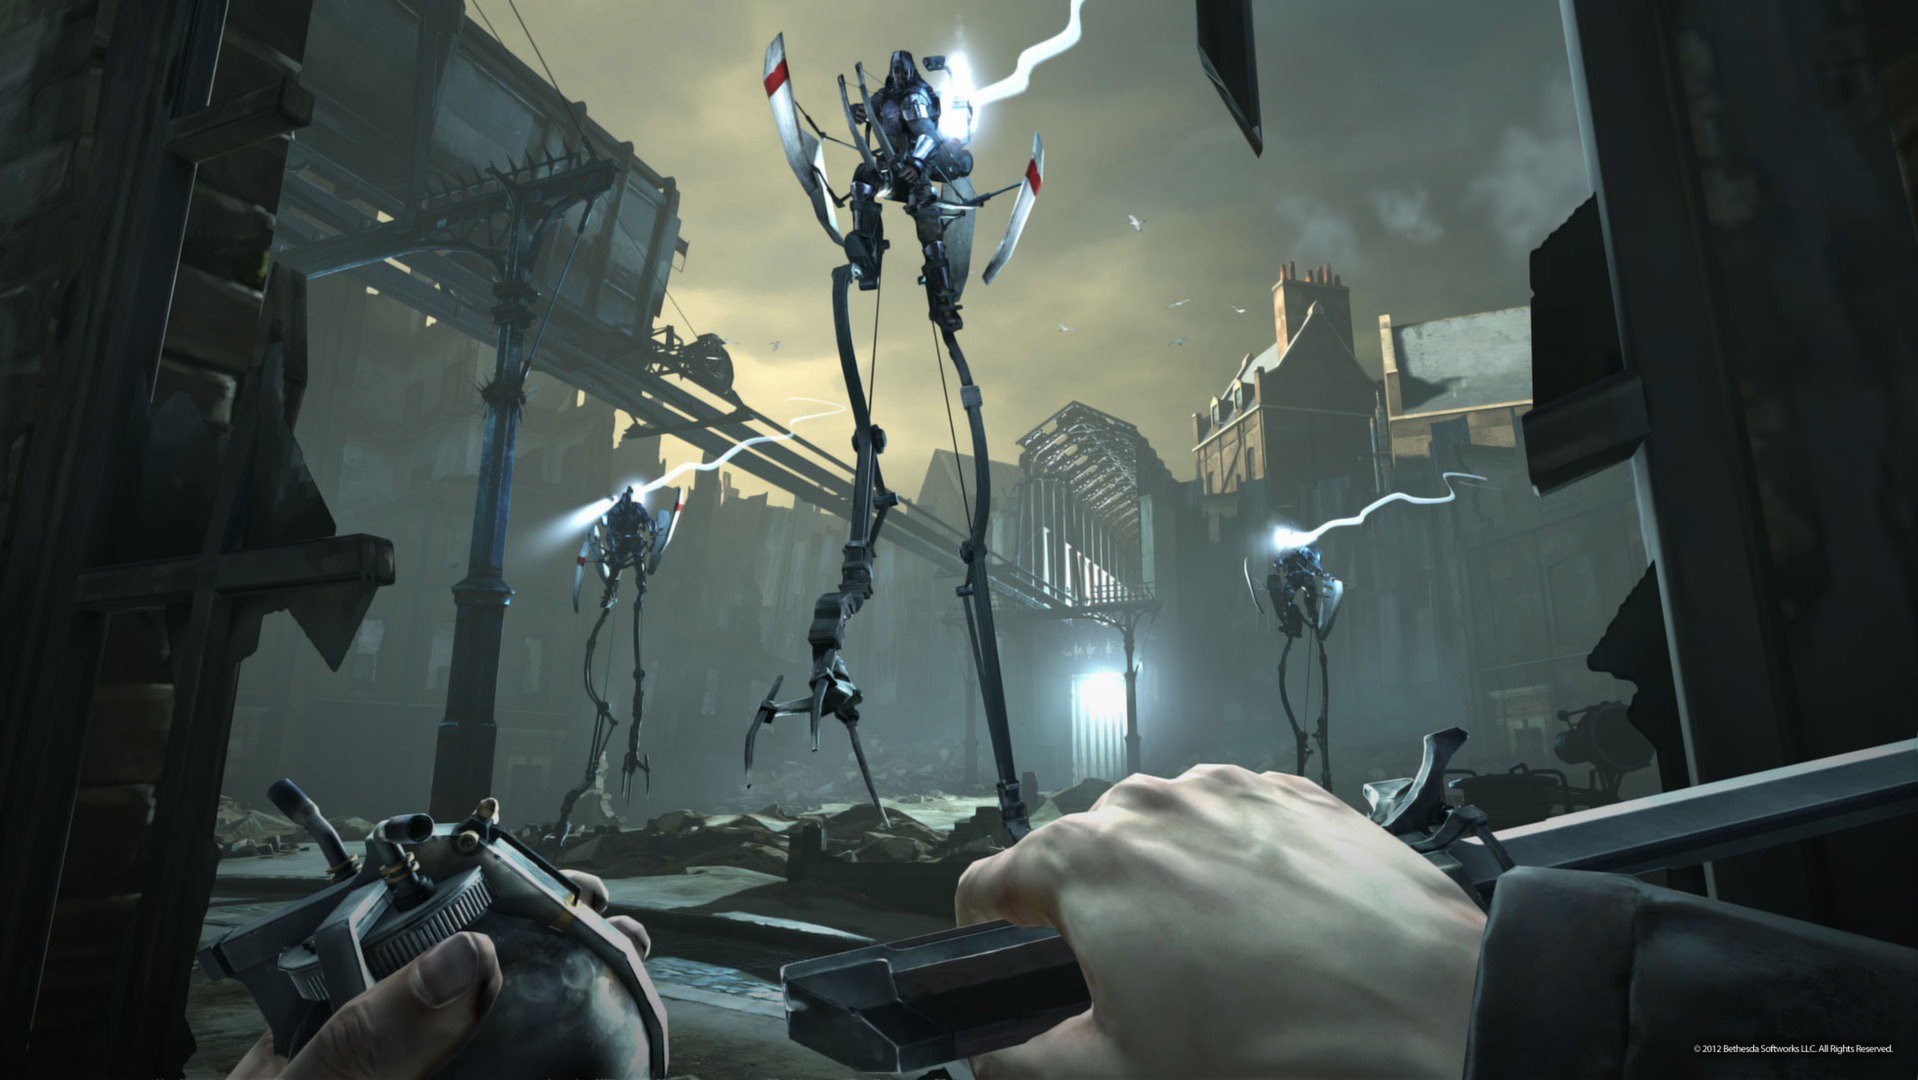 Dishonored Void Walker Arsenal 2